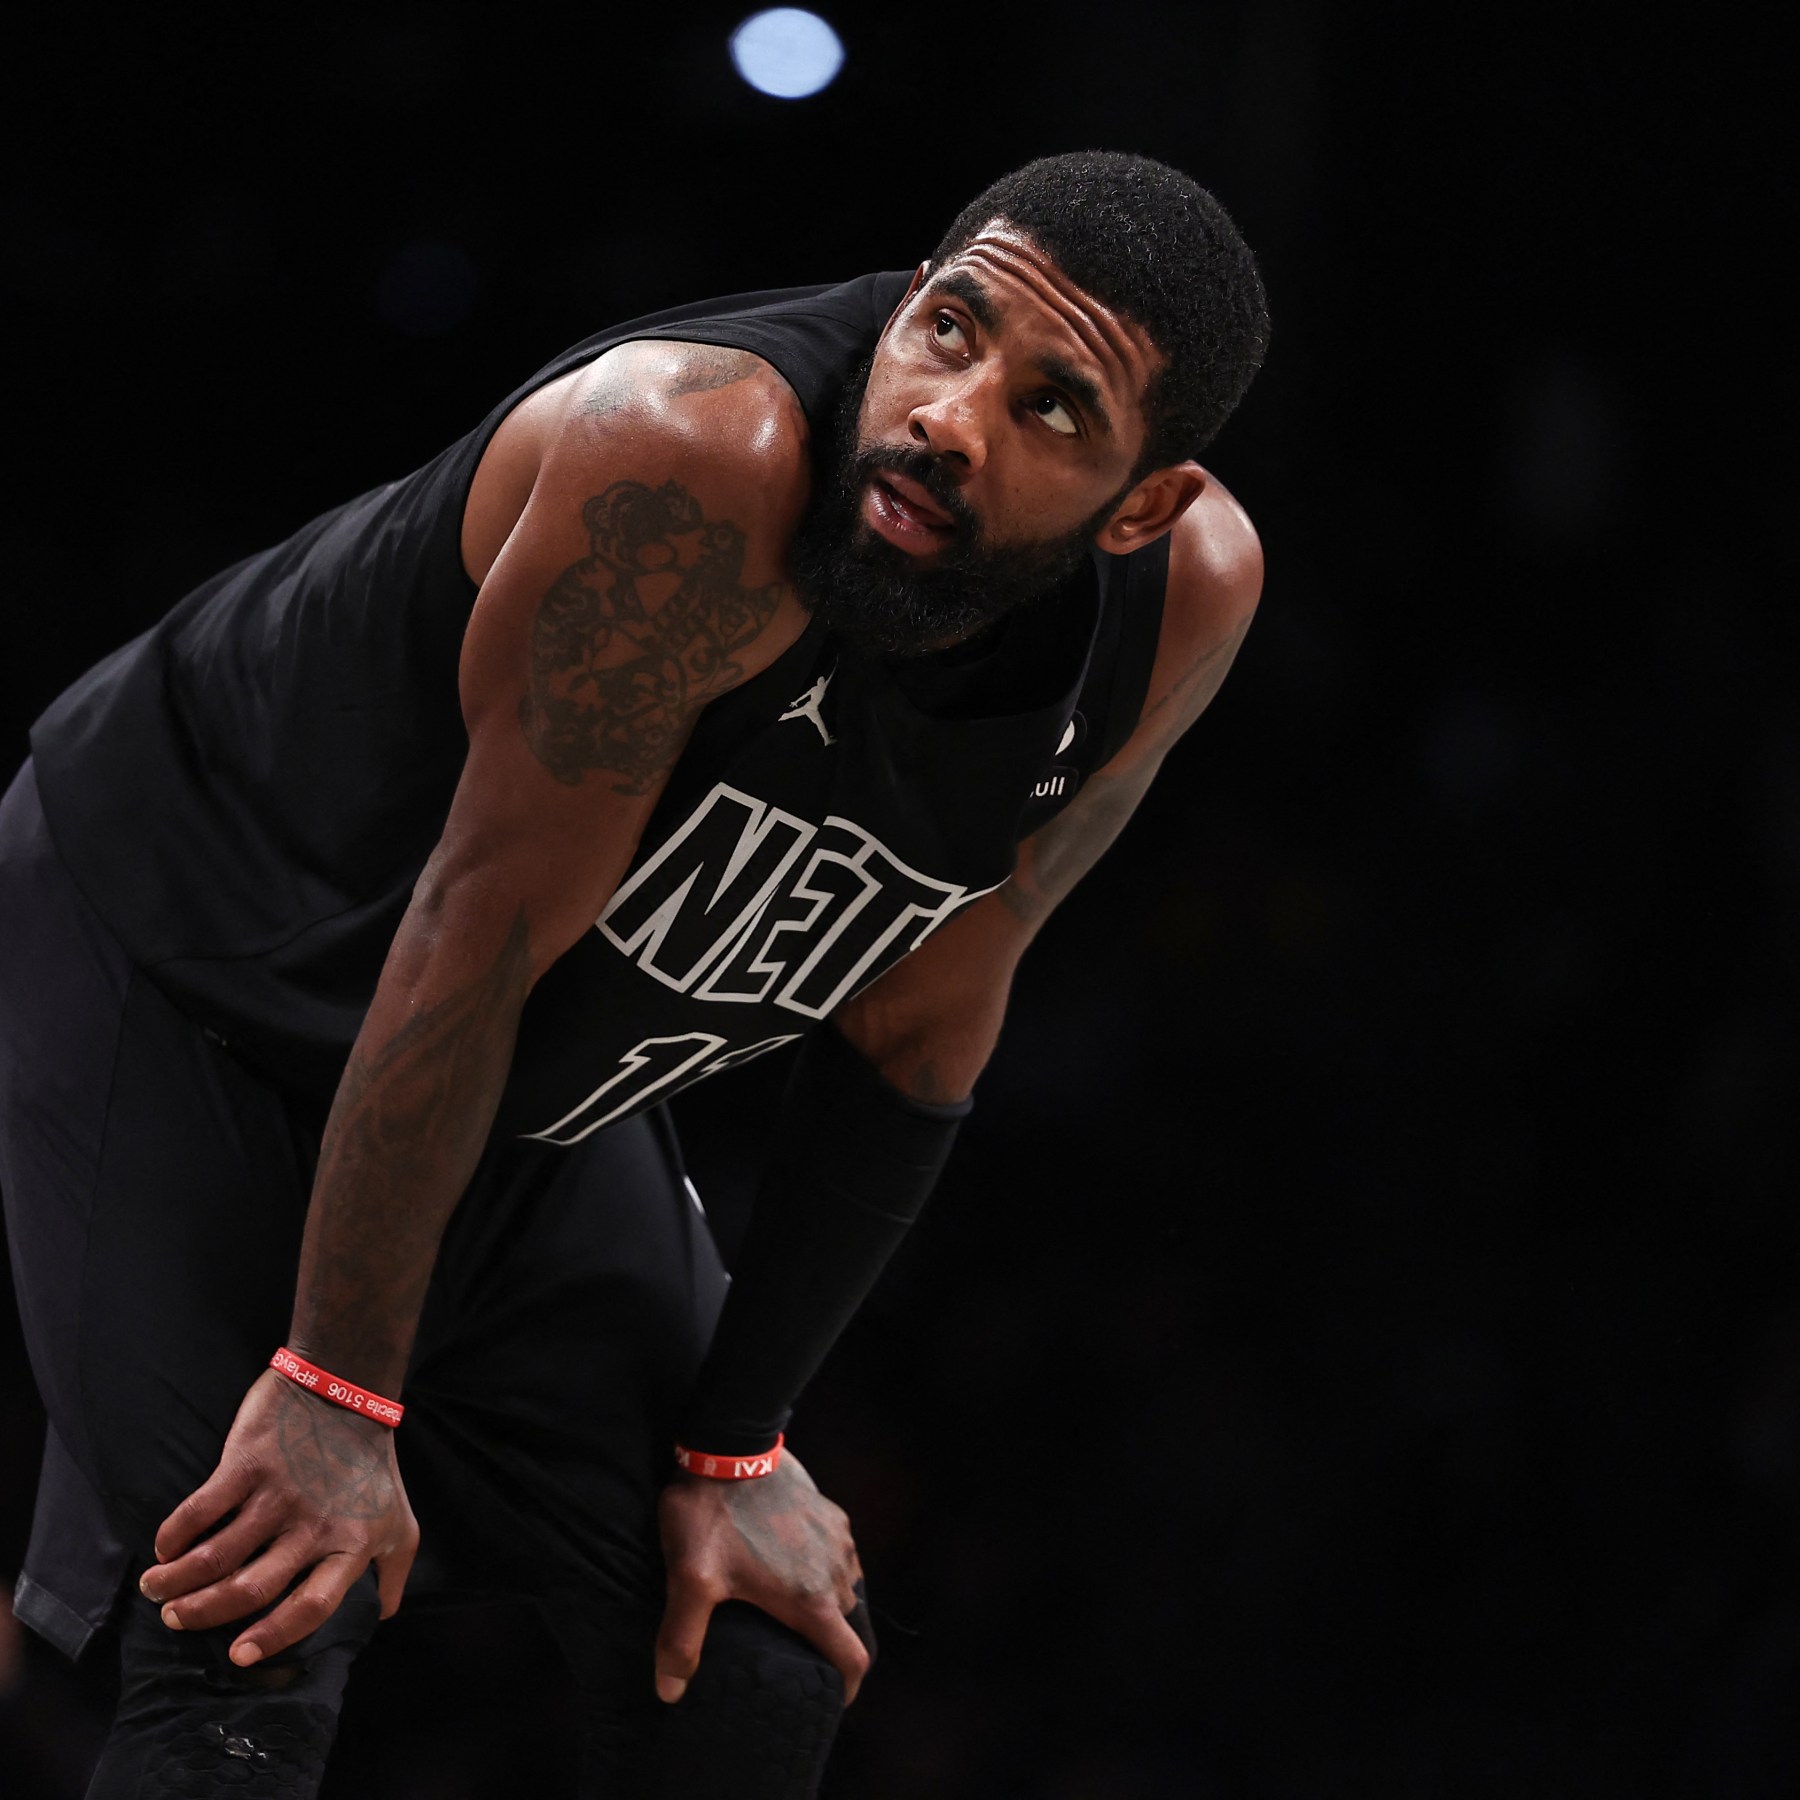 Kyrie Irving, Brooklyn Nets to donate $500,000 each to Anti